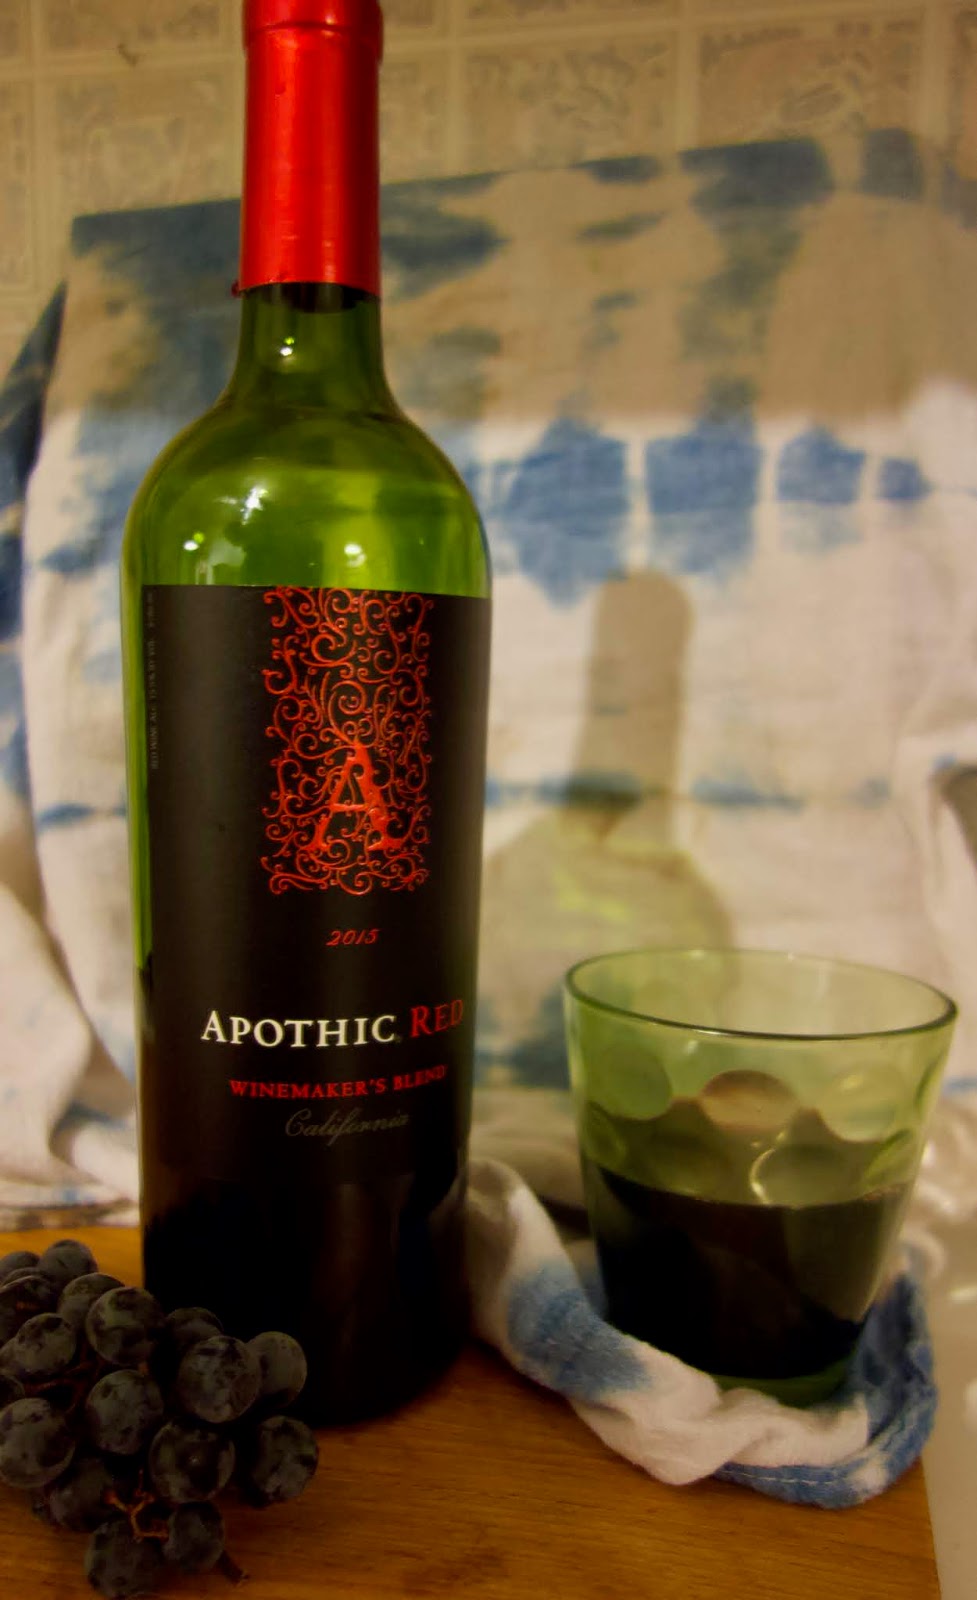 stroud-is-all-over-the-place-apothic-red-california-wine